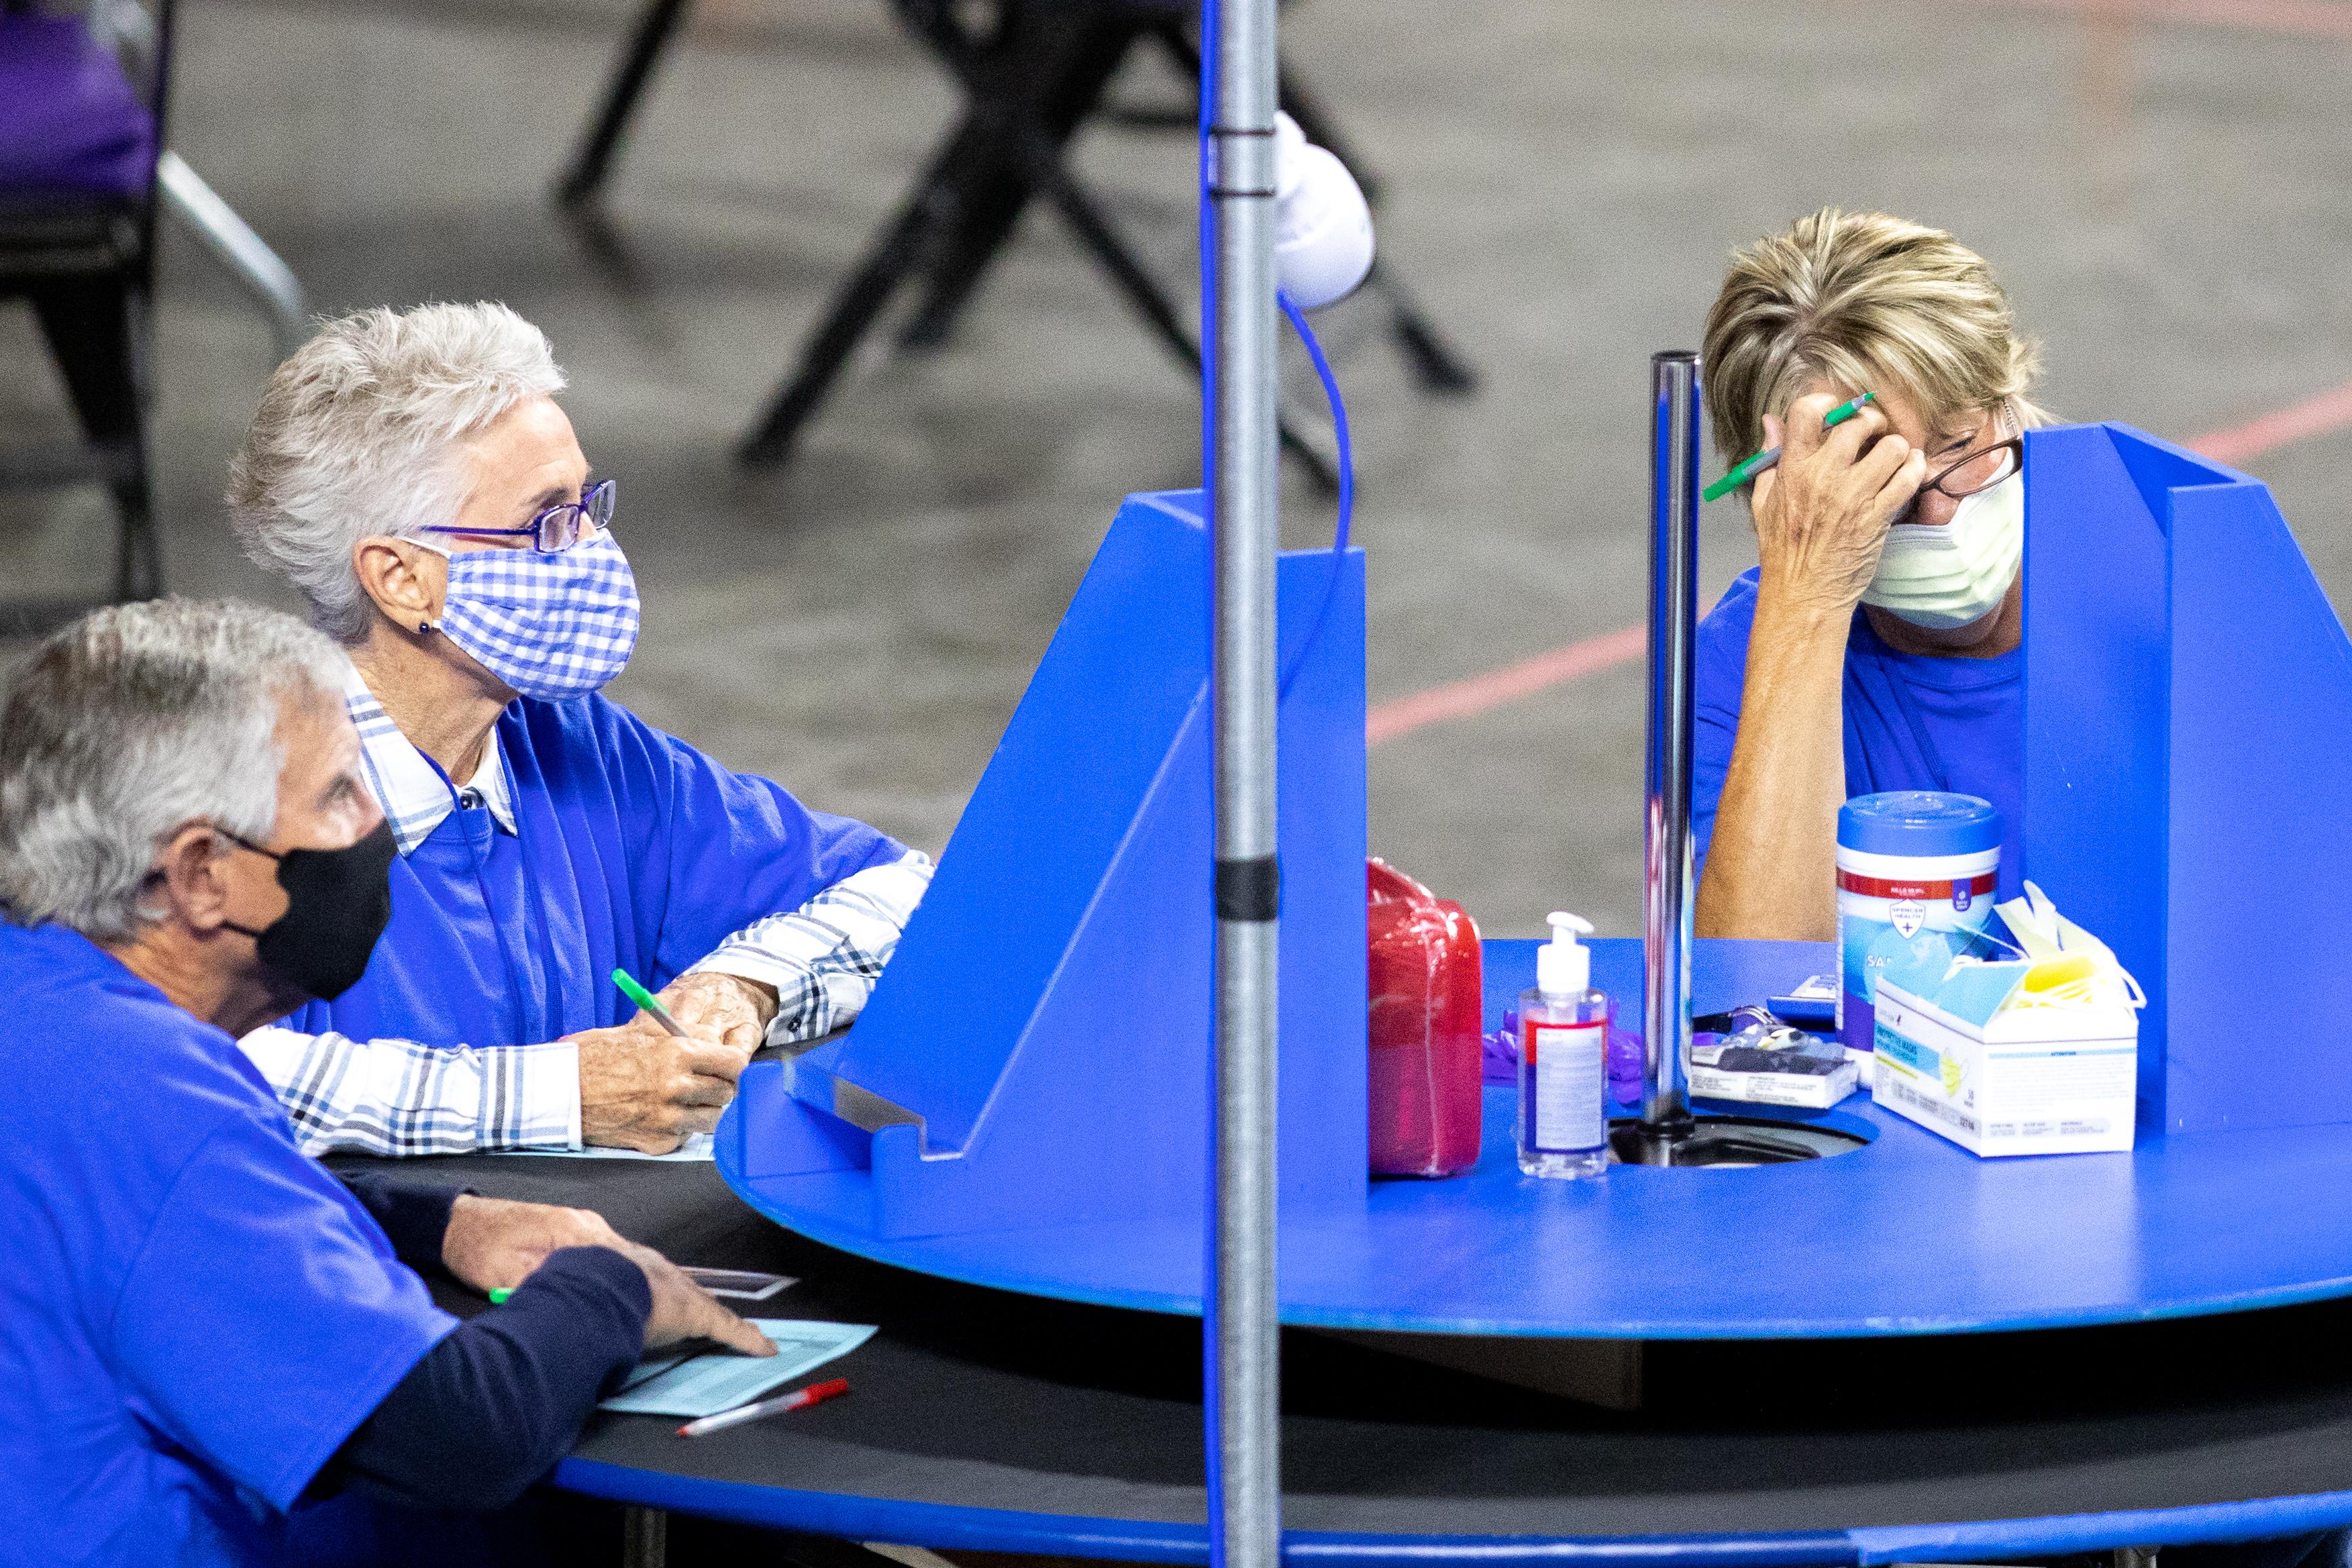 A woman leans her head into her hand in apparent frustration as she sits in front of a blue Lazy Susan on a table. Two other older people sit at the table.